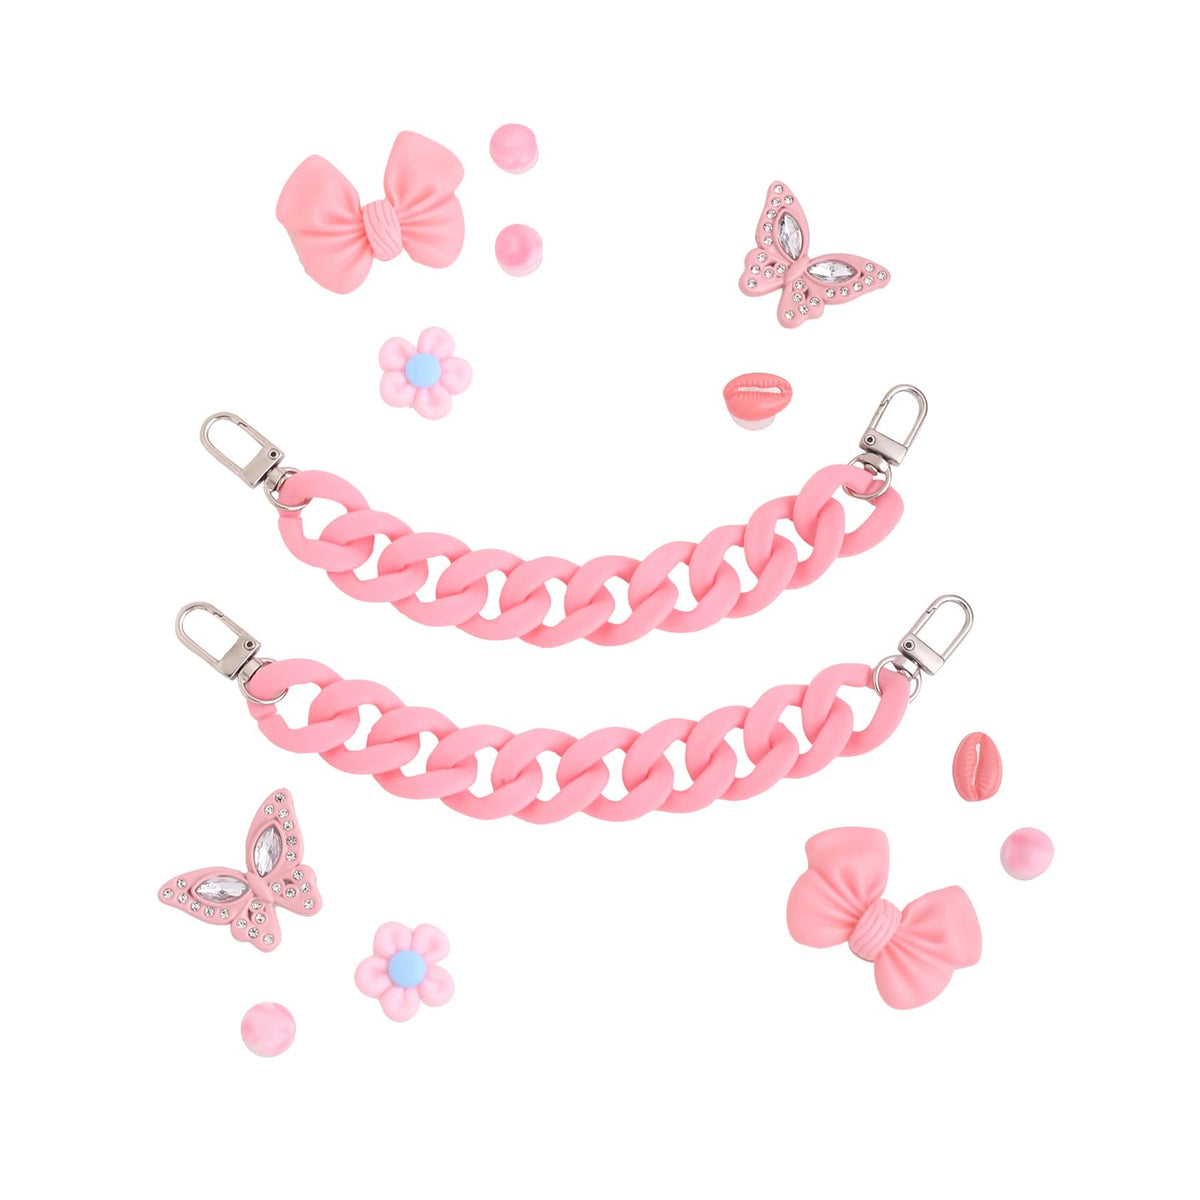 Melbees by Yellow Chimes Shoe Chains for Kids Girls Teens | Shoe Accessories Butterfly Design | Pink Shoe Decoration Charms| Shoe Chains for Unisex | Shoe Chain Charms for Croc/Clogs